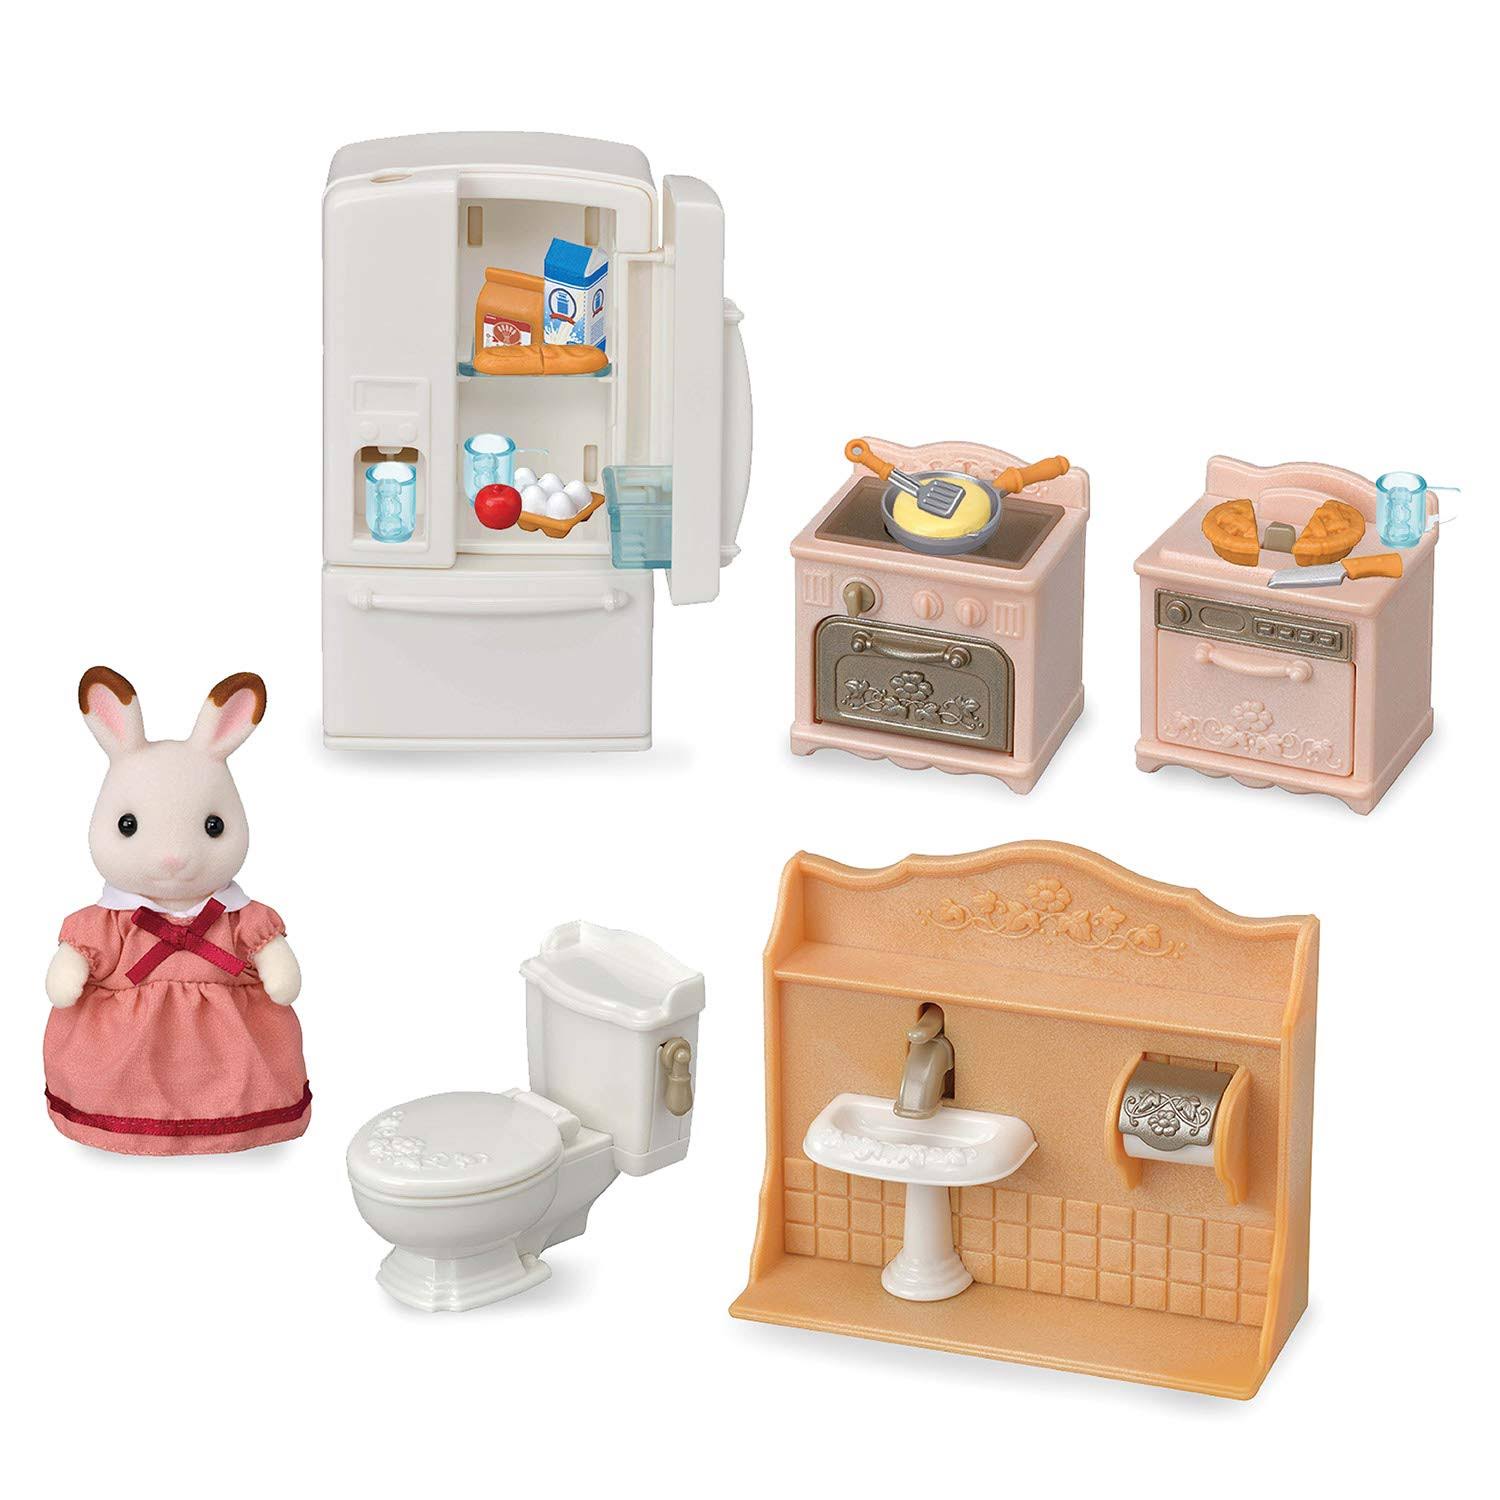 Calico Critters Playful Starter Furniture Set, Dollhouse Furniture Set with Figure and Working Appliances